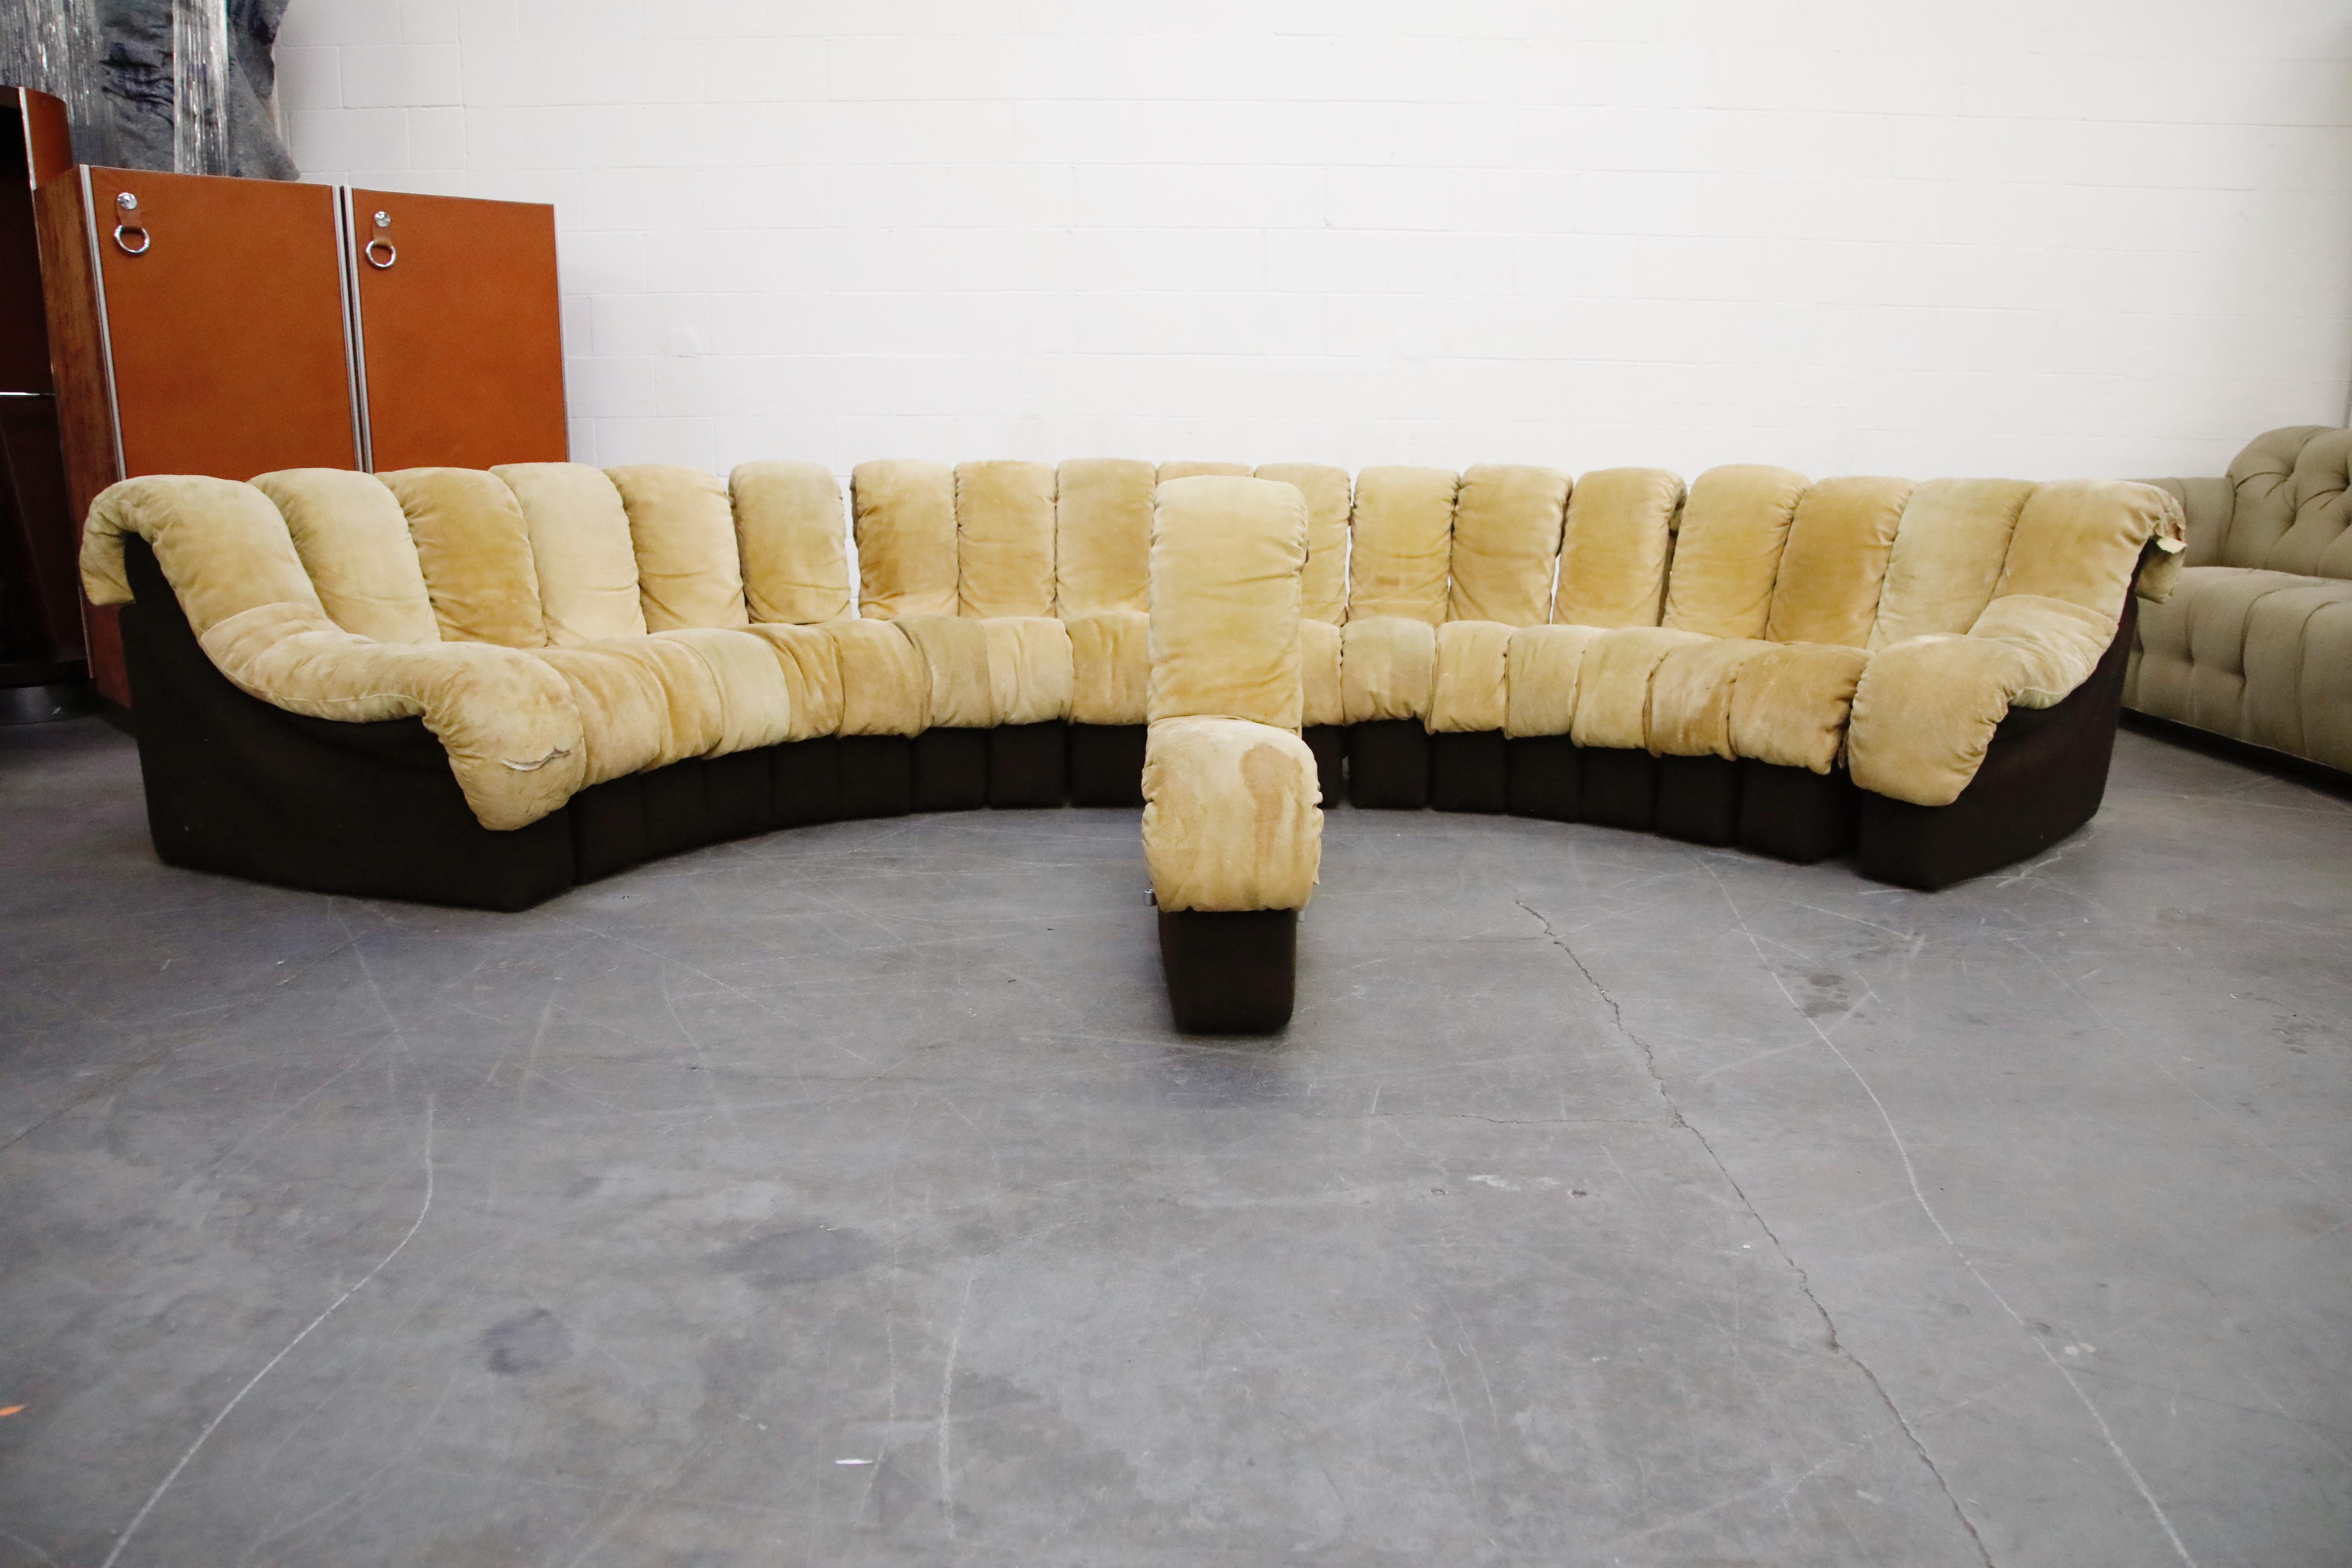 Swiss De Sede DS-600 'Non Stop Sofa' in Tan Suede, 19 Sections, Signed